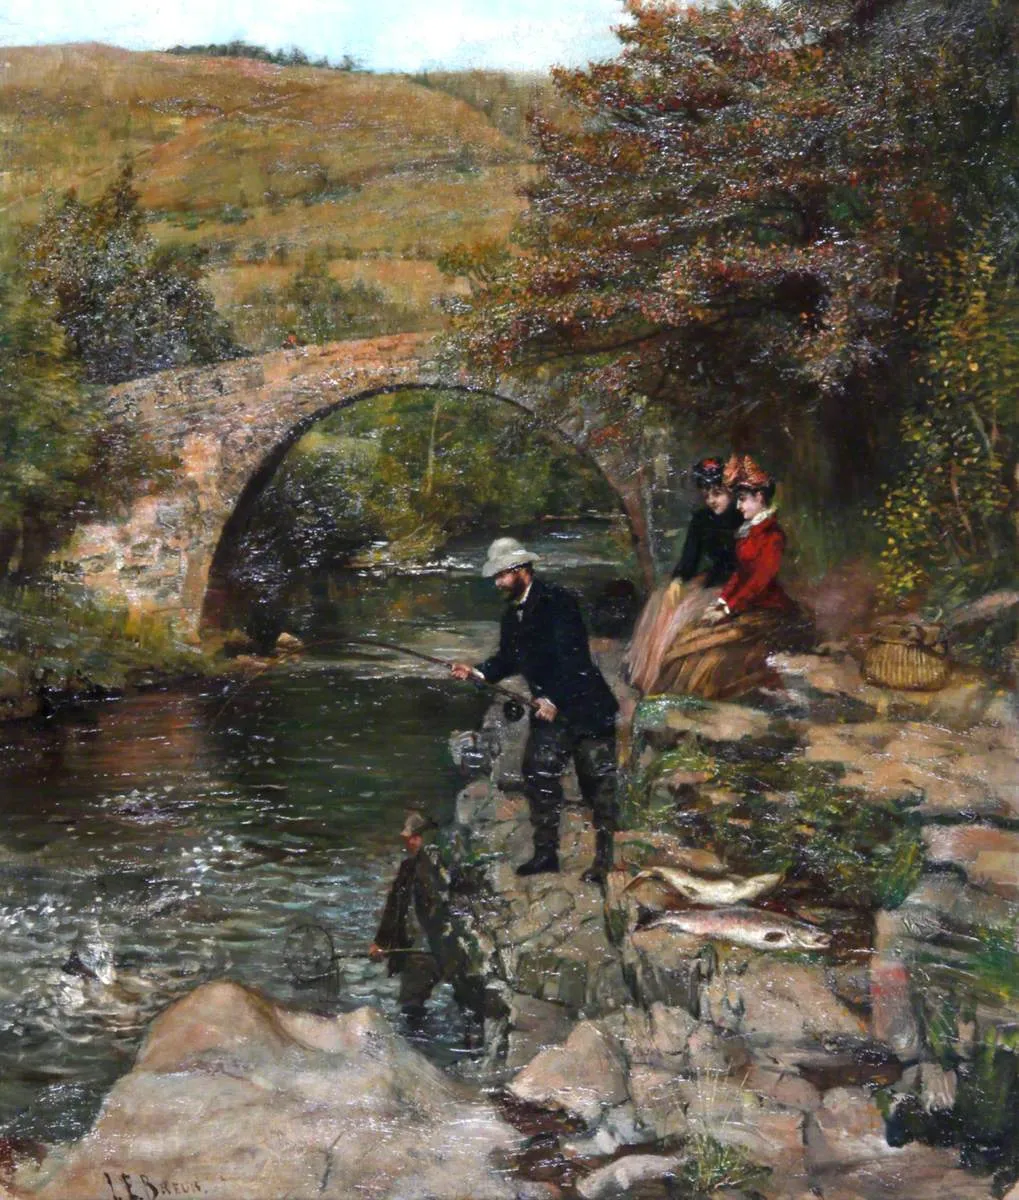 Photo showing: Madame Patti Watching Nicolini Landing a Salmon, Pont Pantysgallog // y Gaer Museum, Art Gallery & Library.

Adelina Patti was a world renowned soprano who purchased Craig-y-Nos Castle in the Upper Swansea Valley and Brecon Beacons. She lived there with her second husband, tenor Ernest Nicolini, until his death. Pont Pantysgallog is a beautiful bridge over the River Usk.